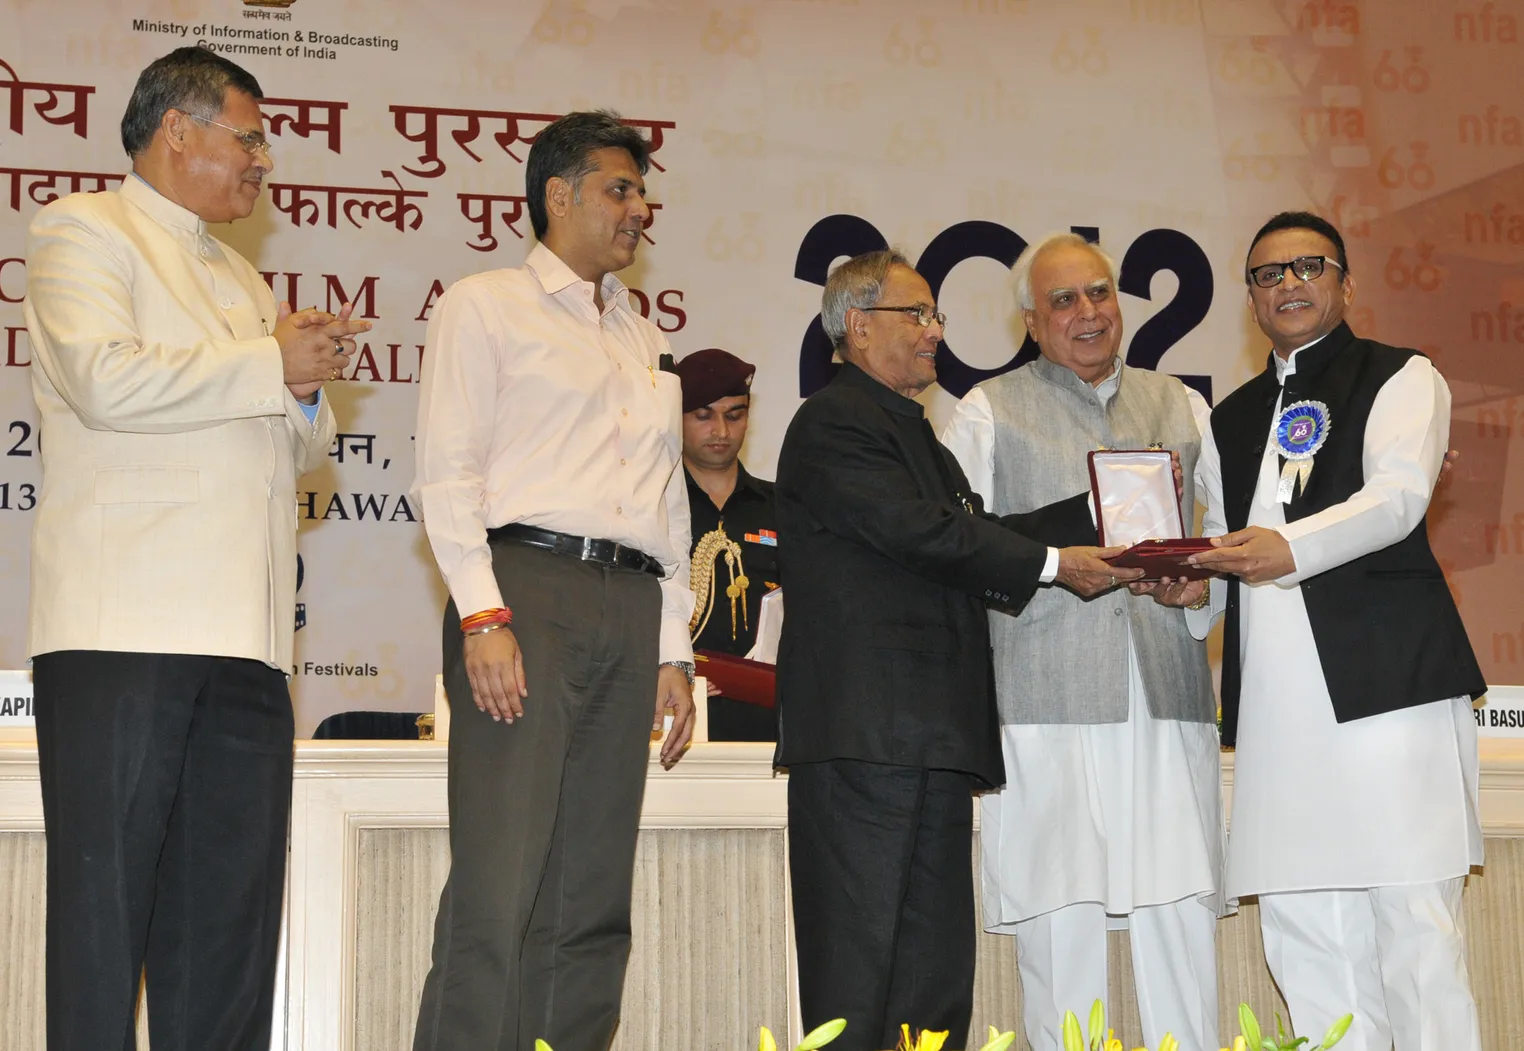 File:Pranab Mukherjee presenting the Rajat Kamal Award for Best Supporting  Actor Vicky Donor (Hindi), to Shri Annu Kapoor, at the 60th National Film  Awards function.jpg - Wikimedia Commons